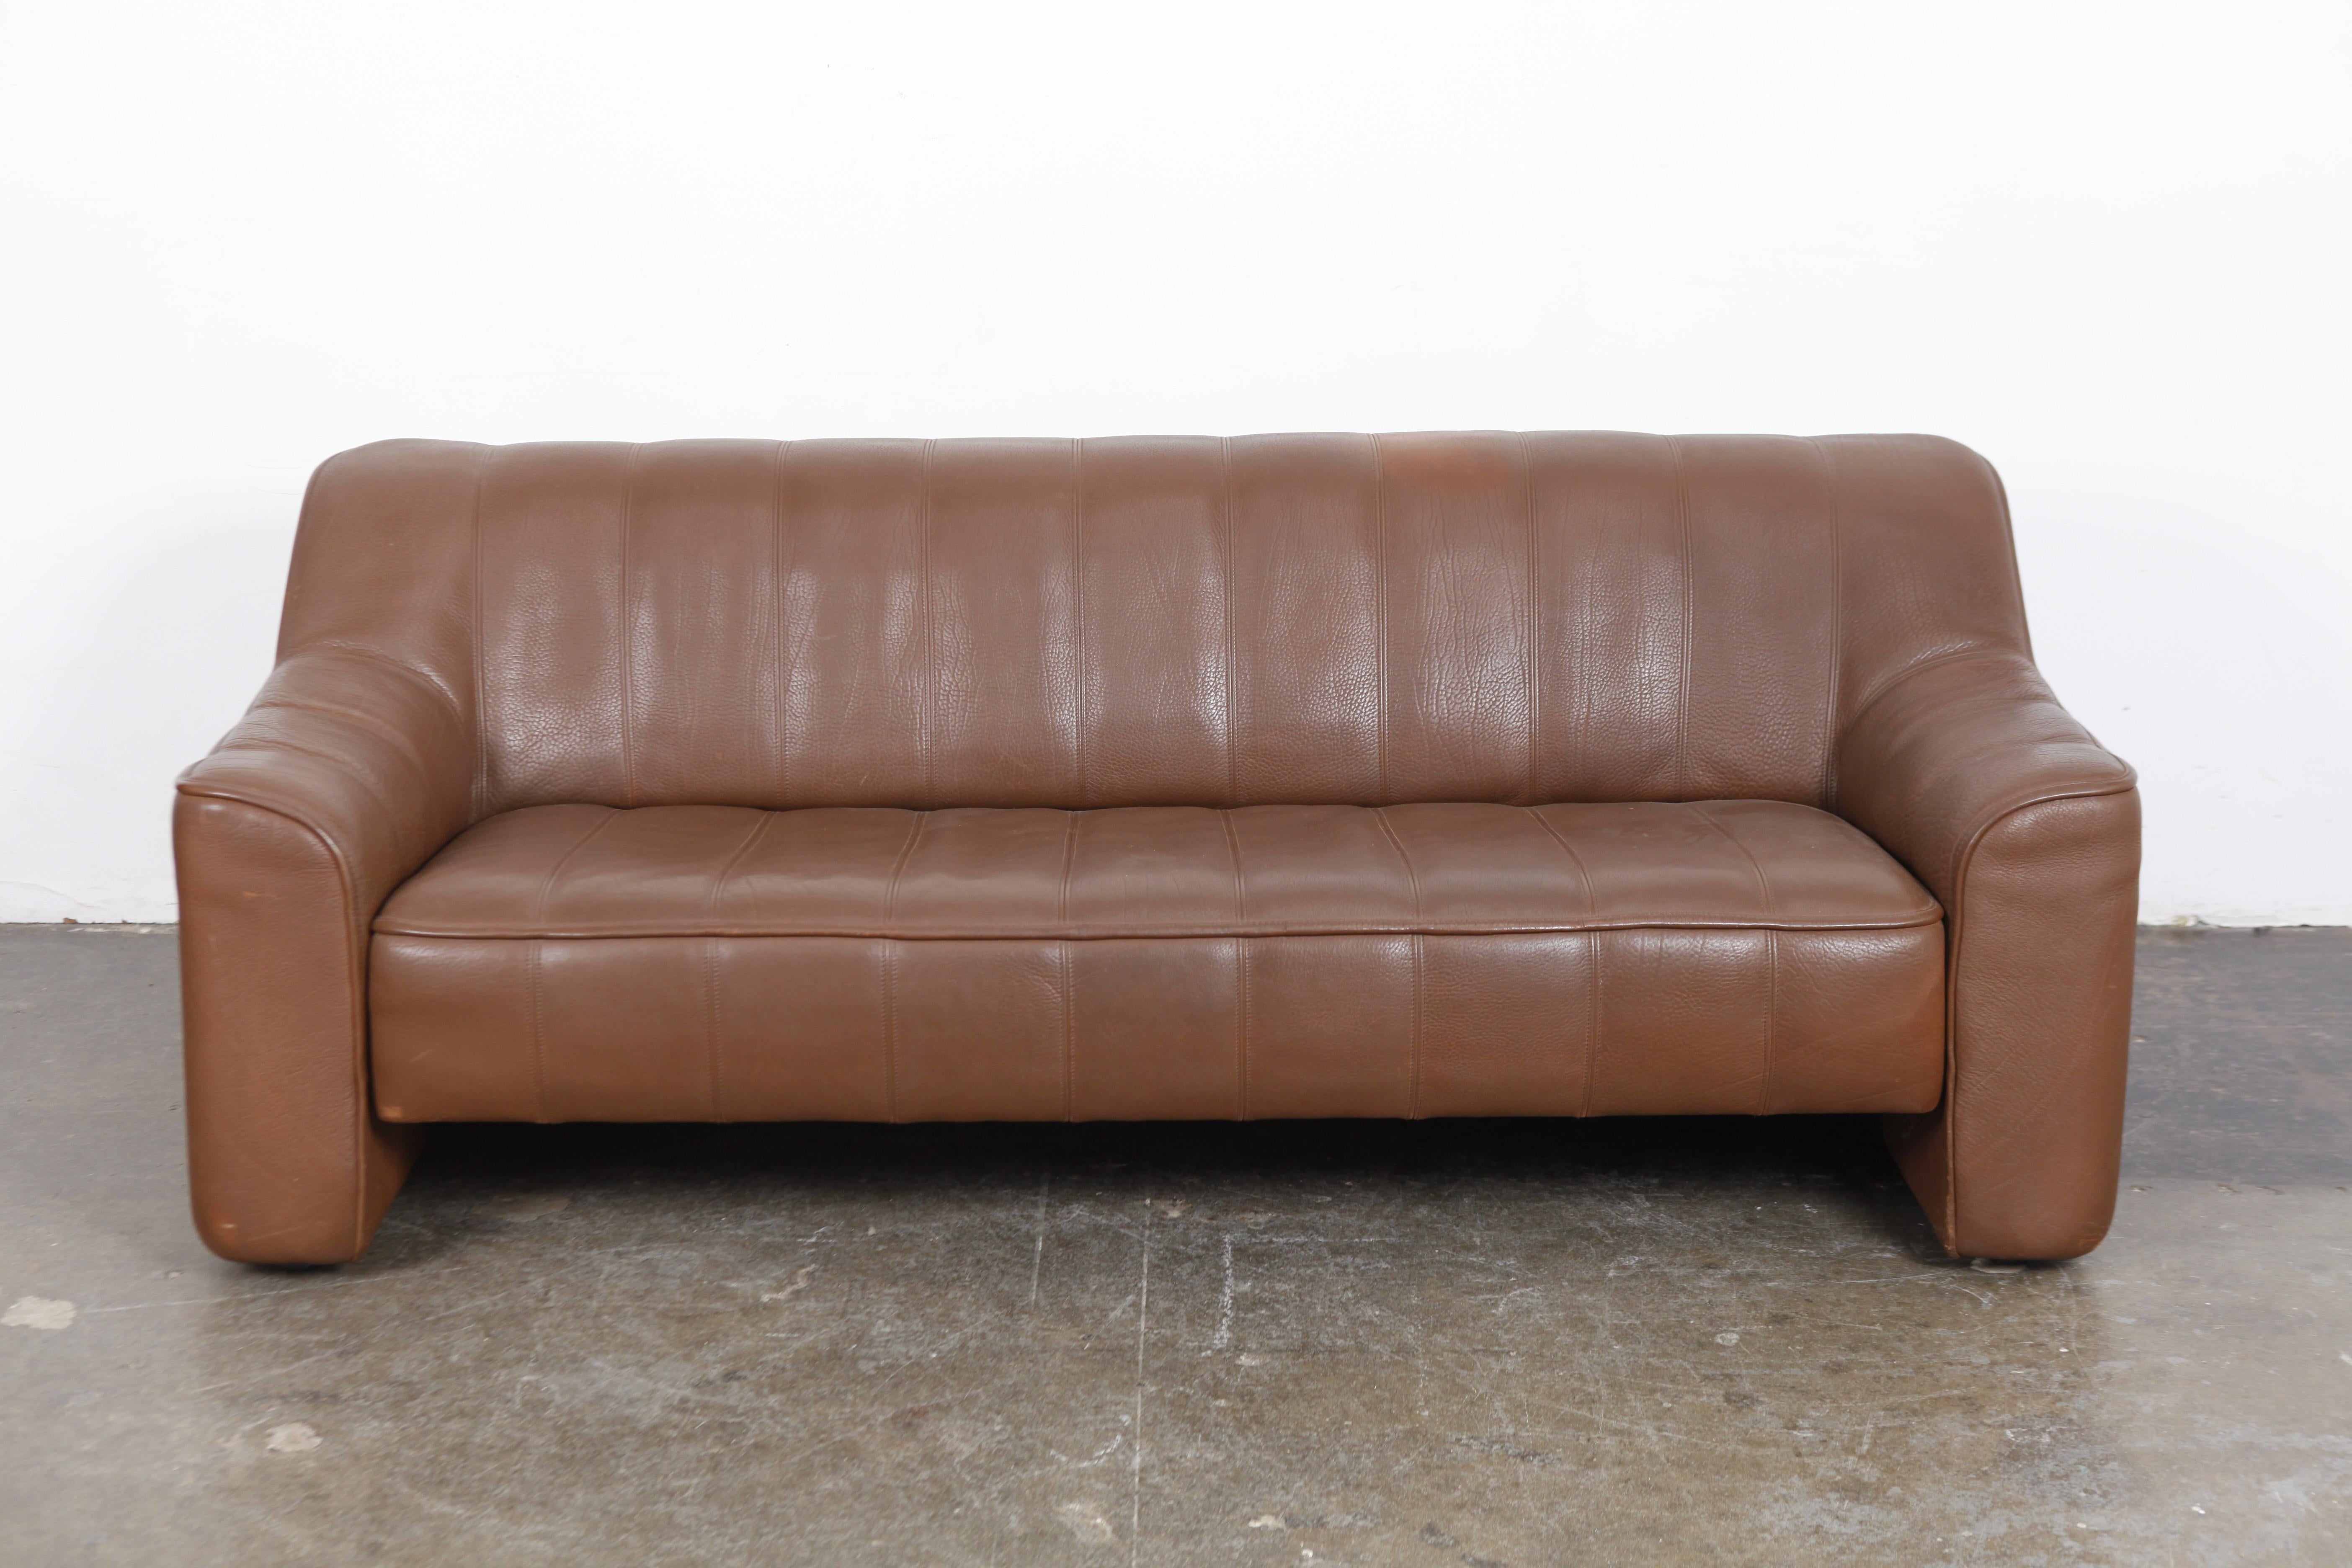 1970s De Sede Leather 3-Seat Sofa 'Model DS 44' from Switzerland For Sale 2